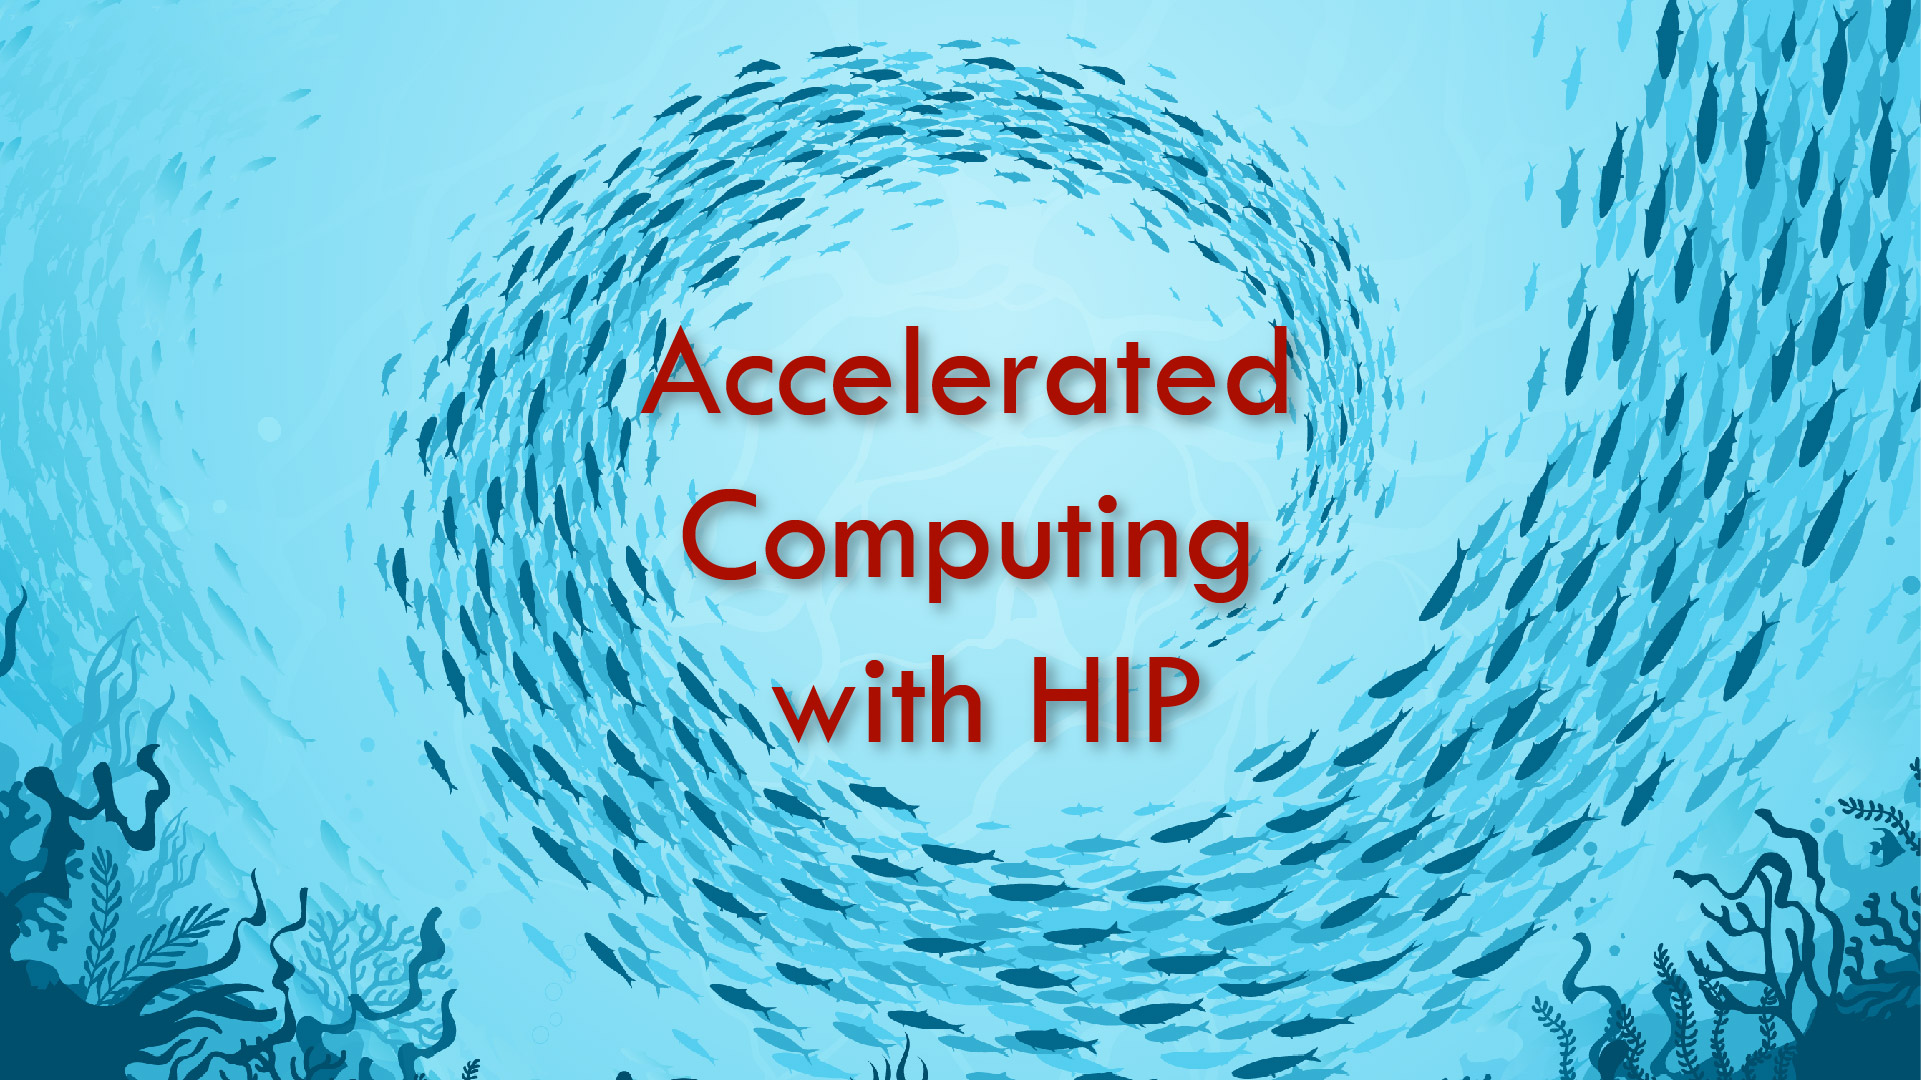 Accelerated computing with HIP